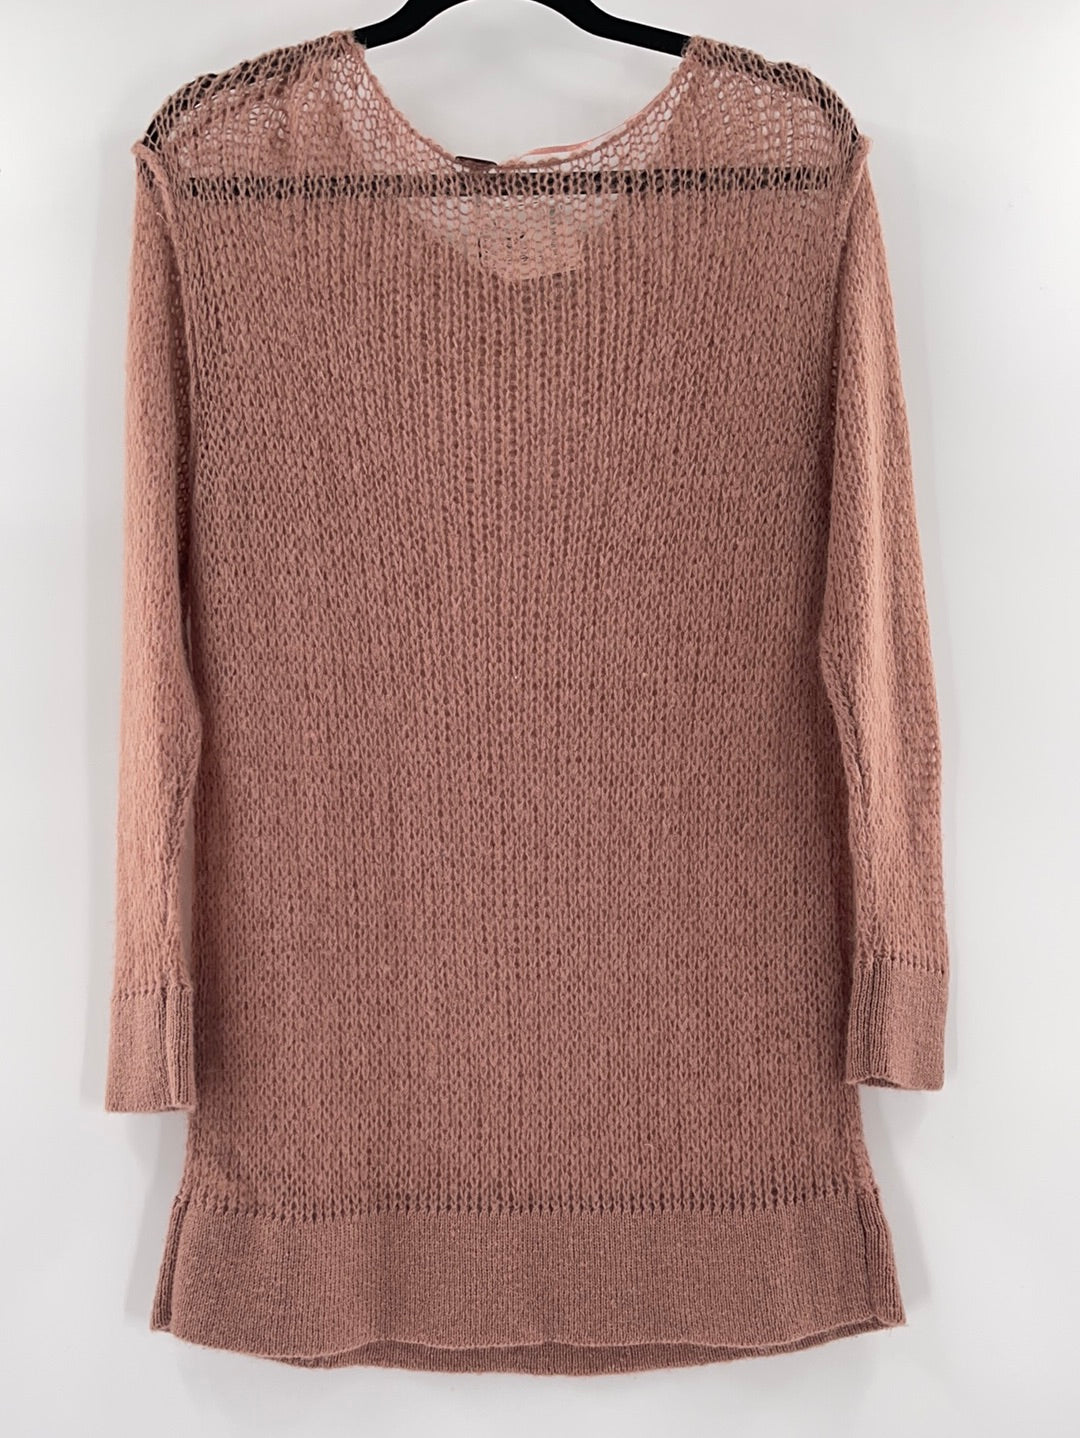 Free People Sheer Knit Off Dusty Pink Sweater (Size XS)